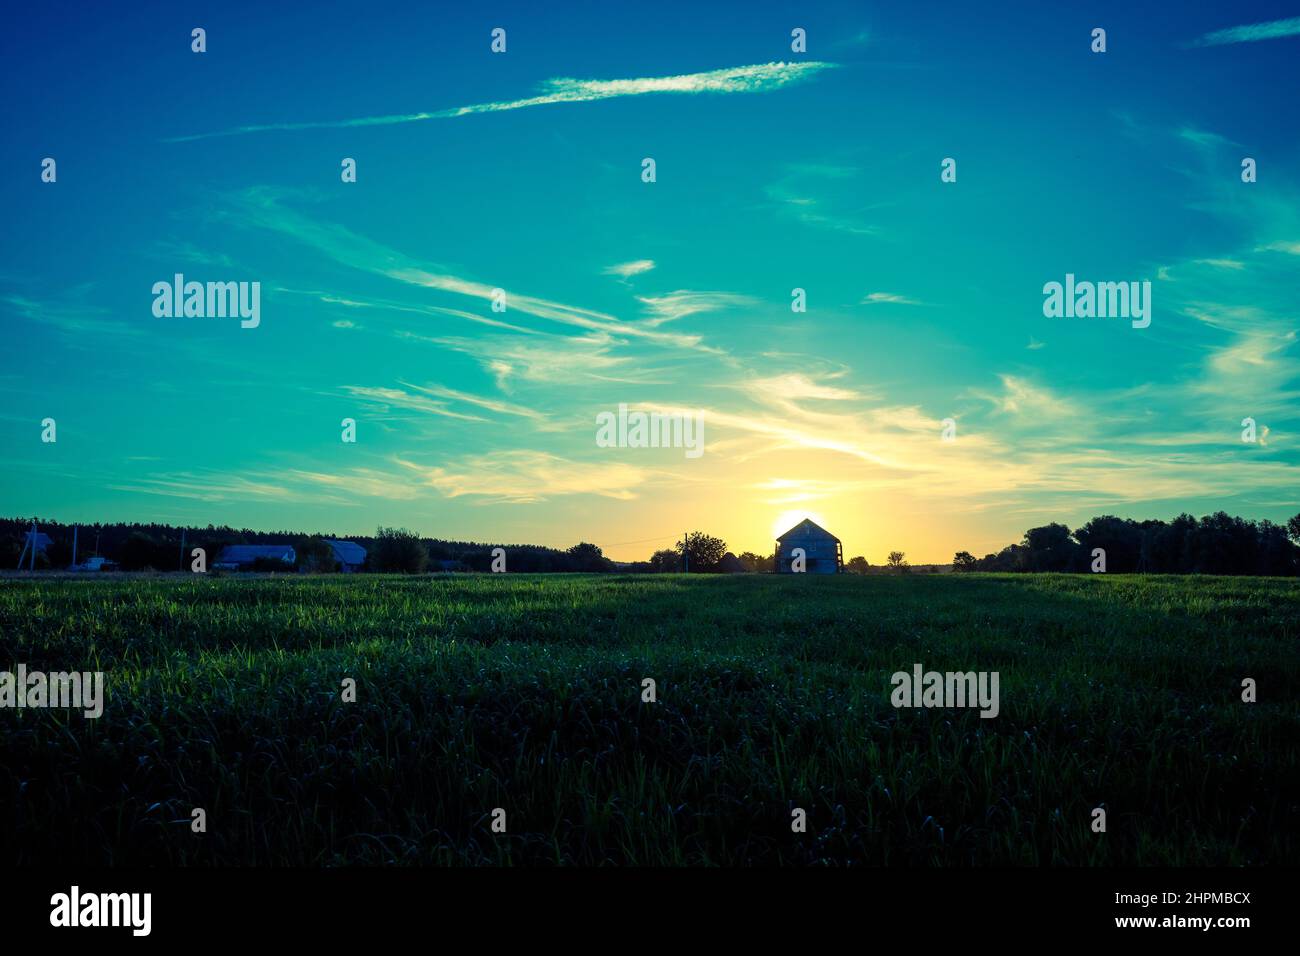 Rural landscape in the evening at sunset. Silhouette of the village against the background of a beautiful gradient evening sky Stock Photo